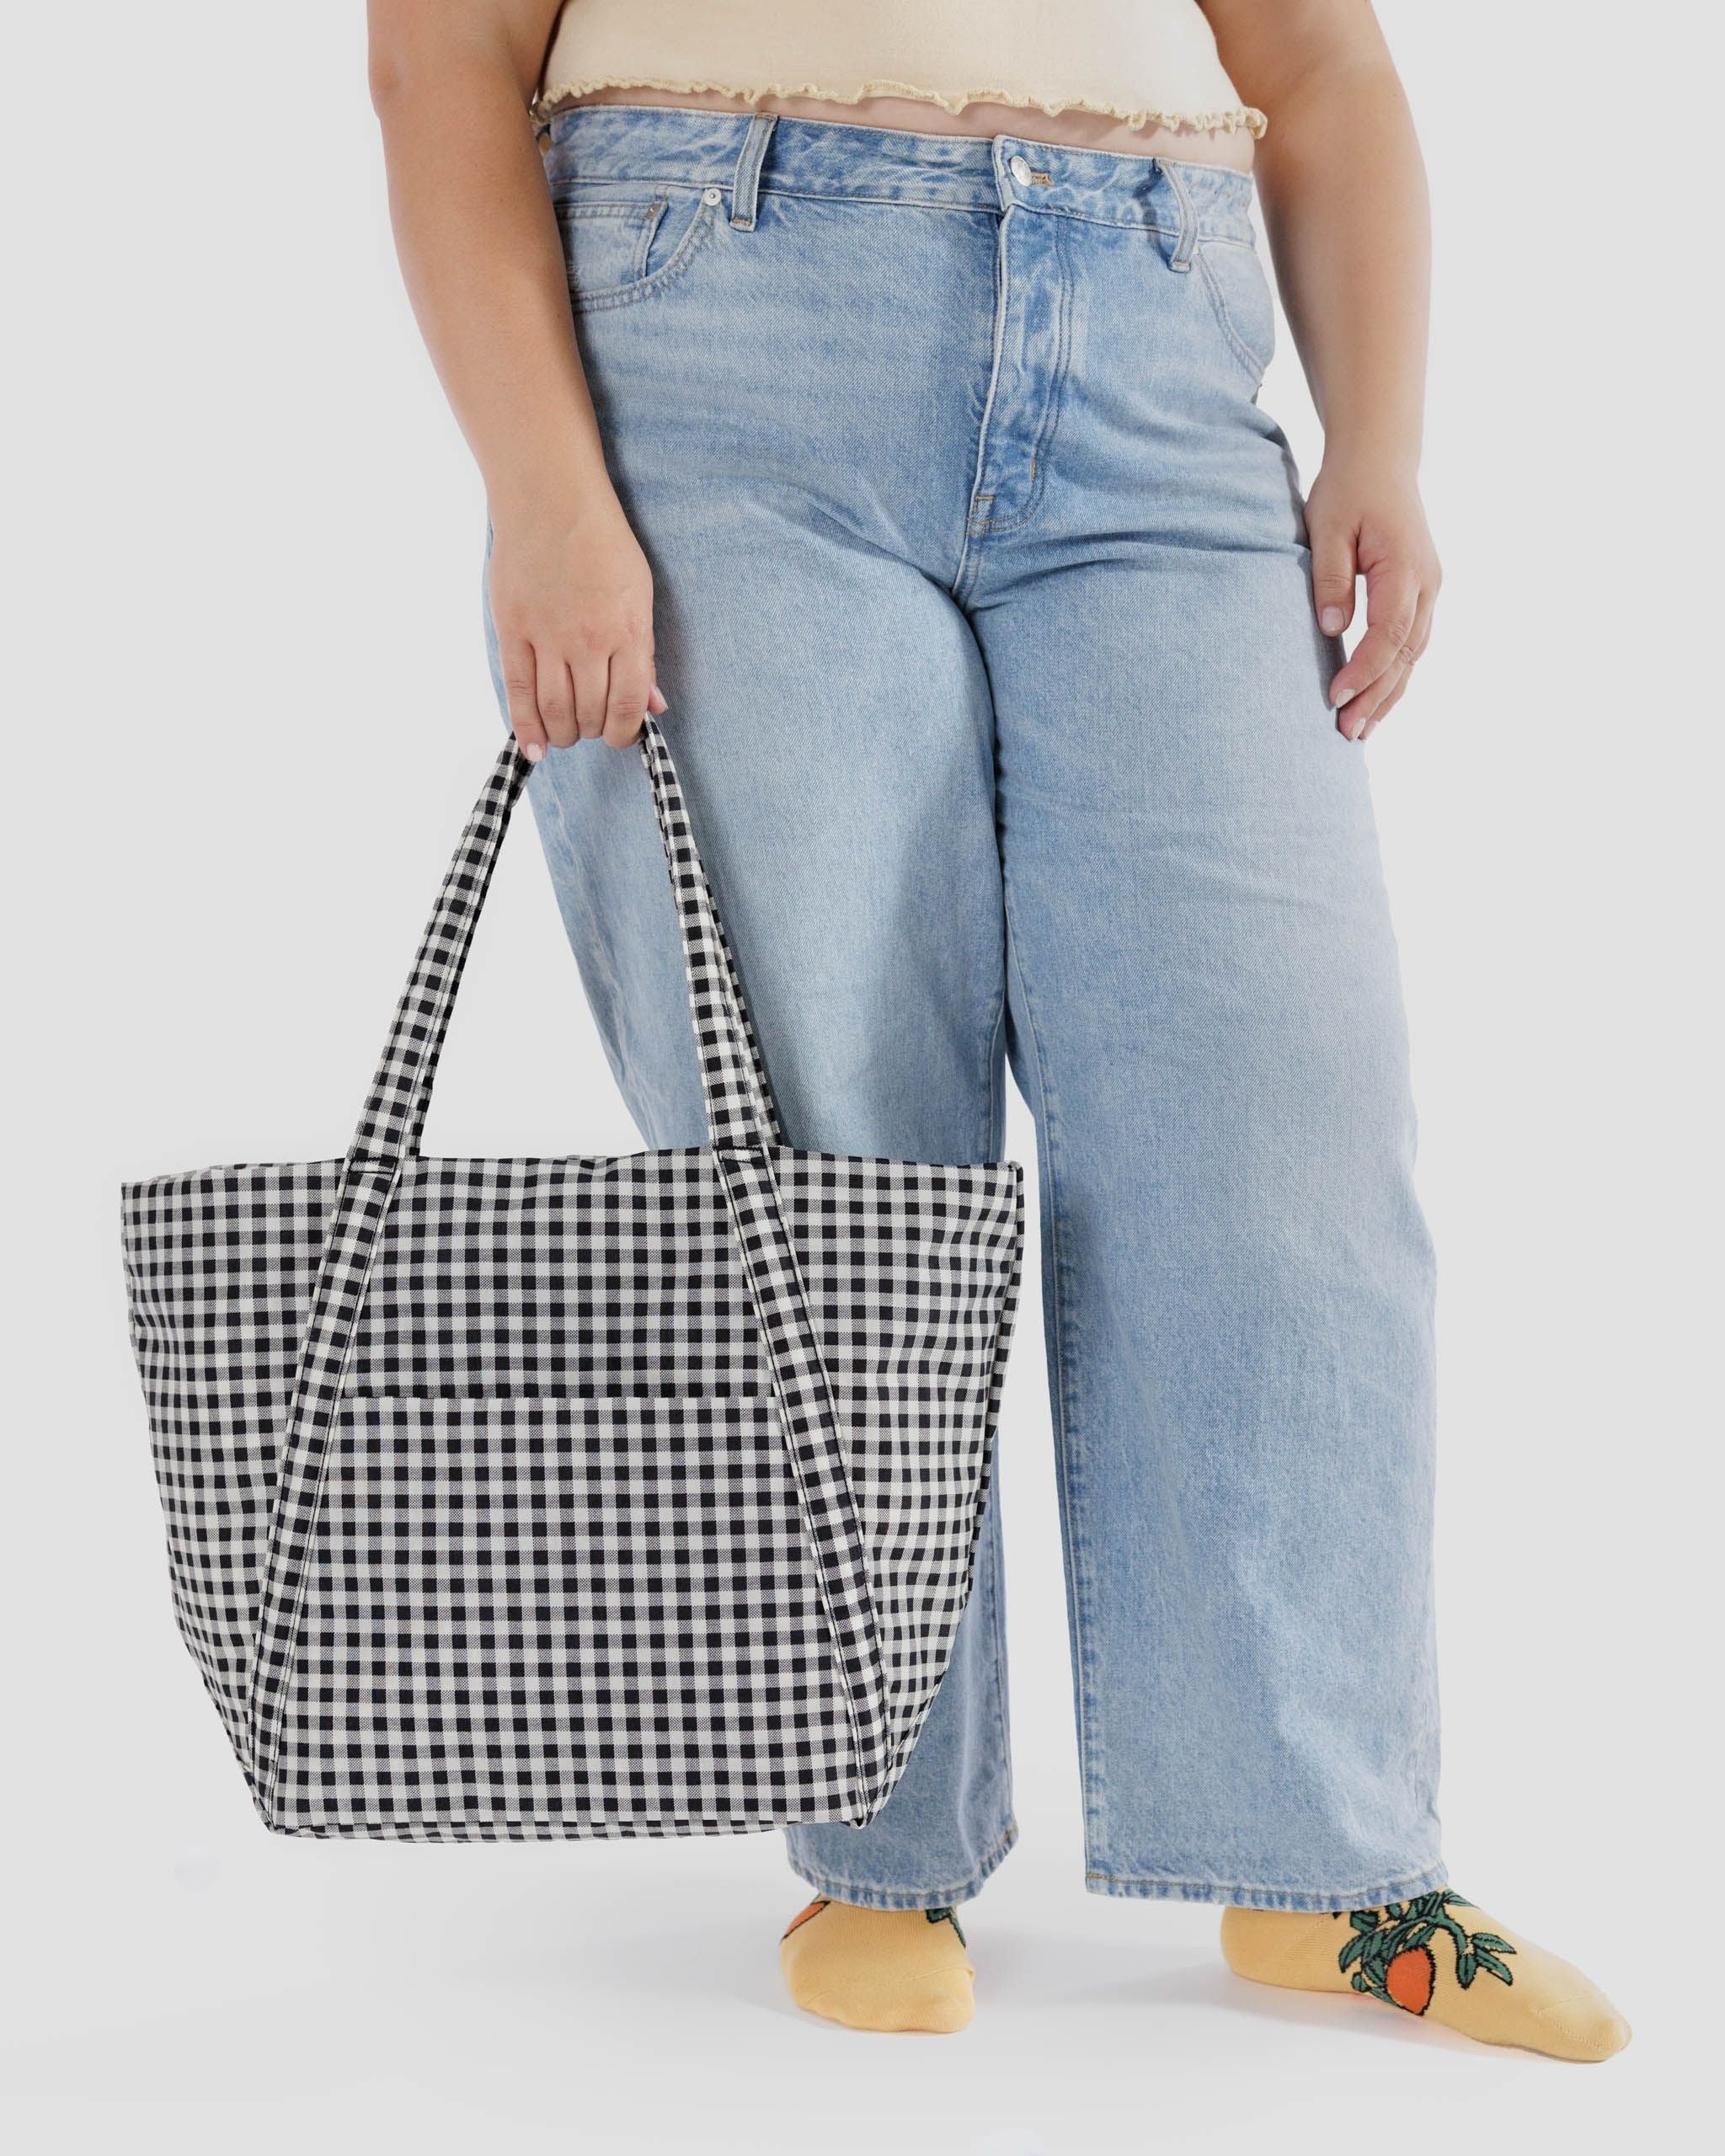 Baggu Cloud Bag - Black & White Gingham | Collective Request 